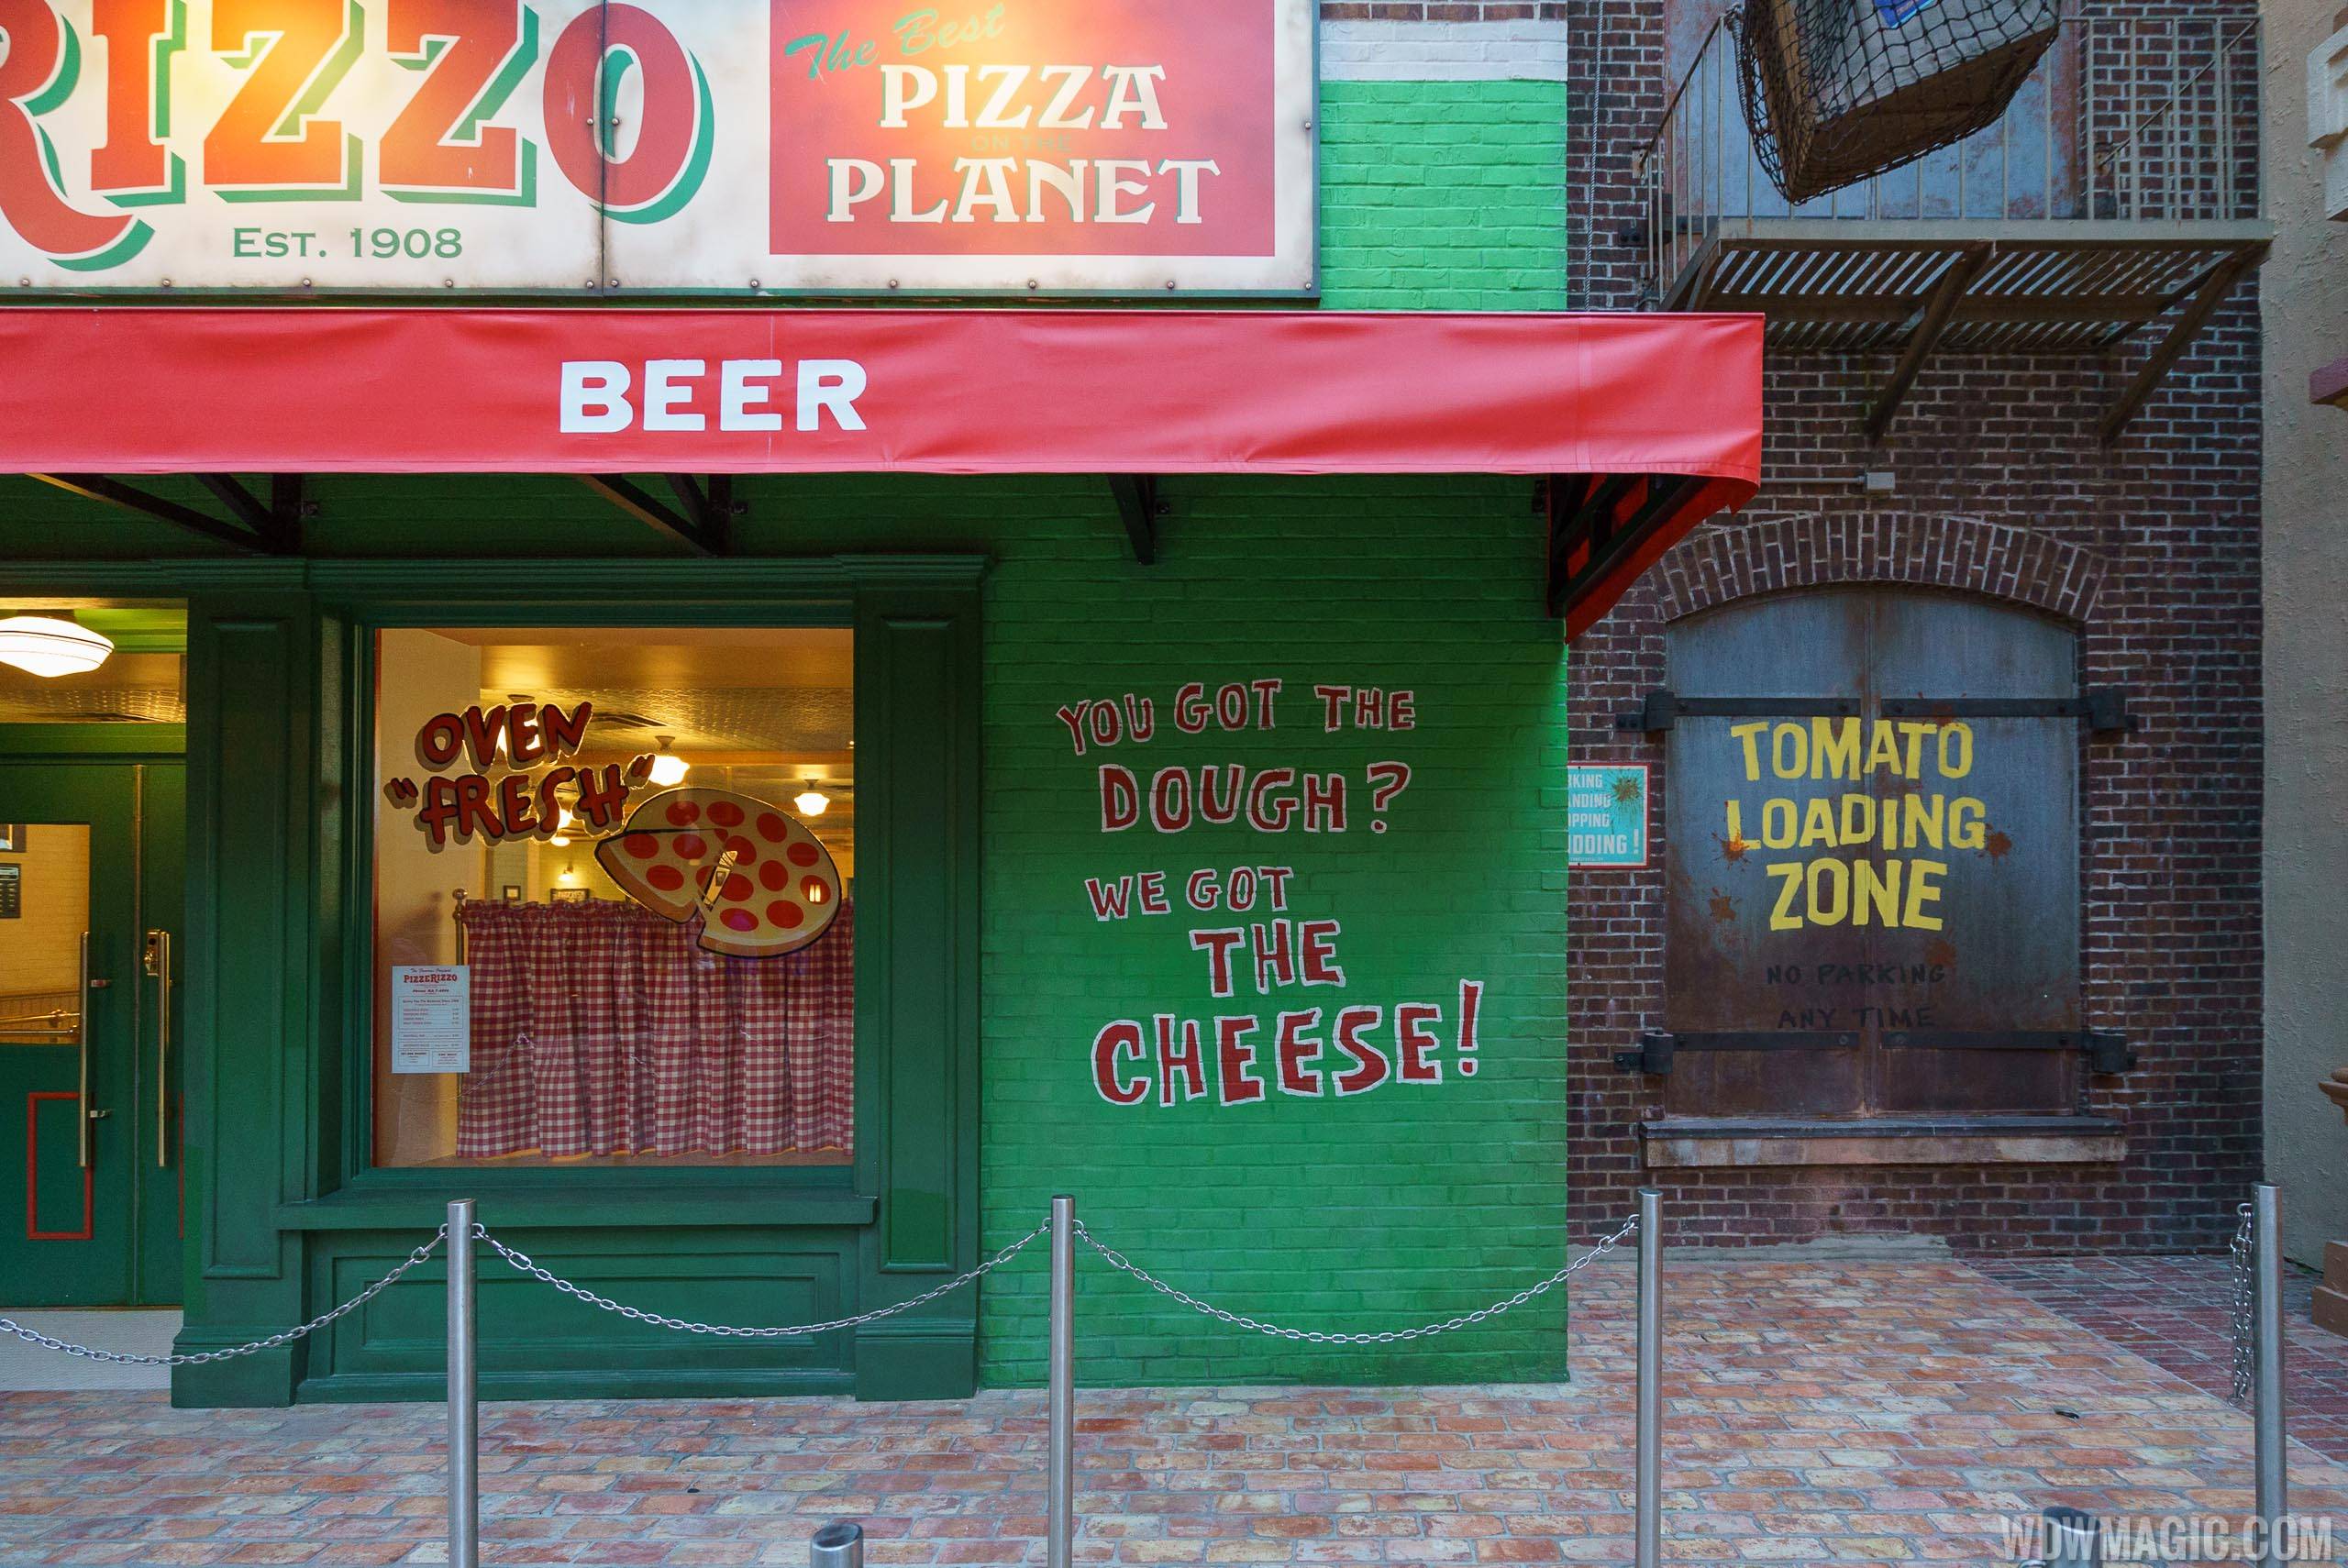 PizzeRizzo completed exterior